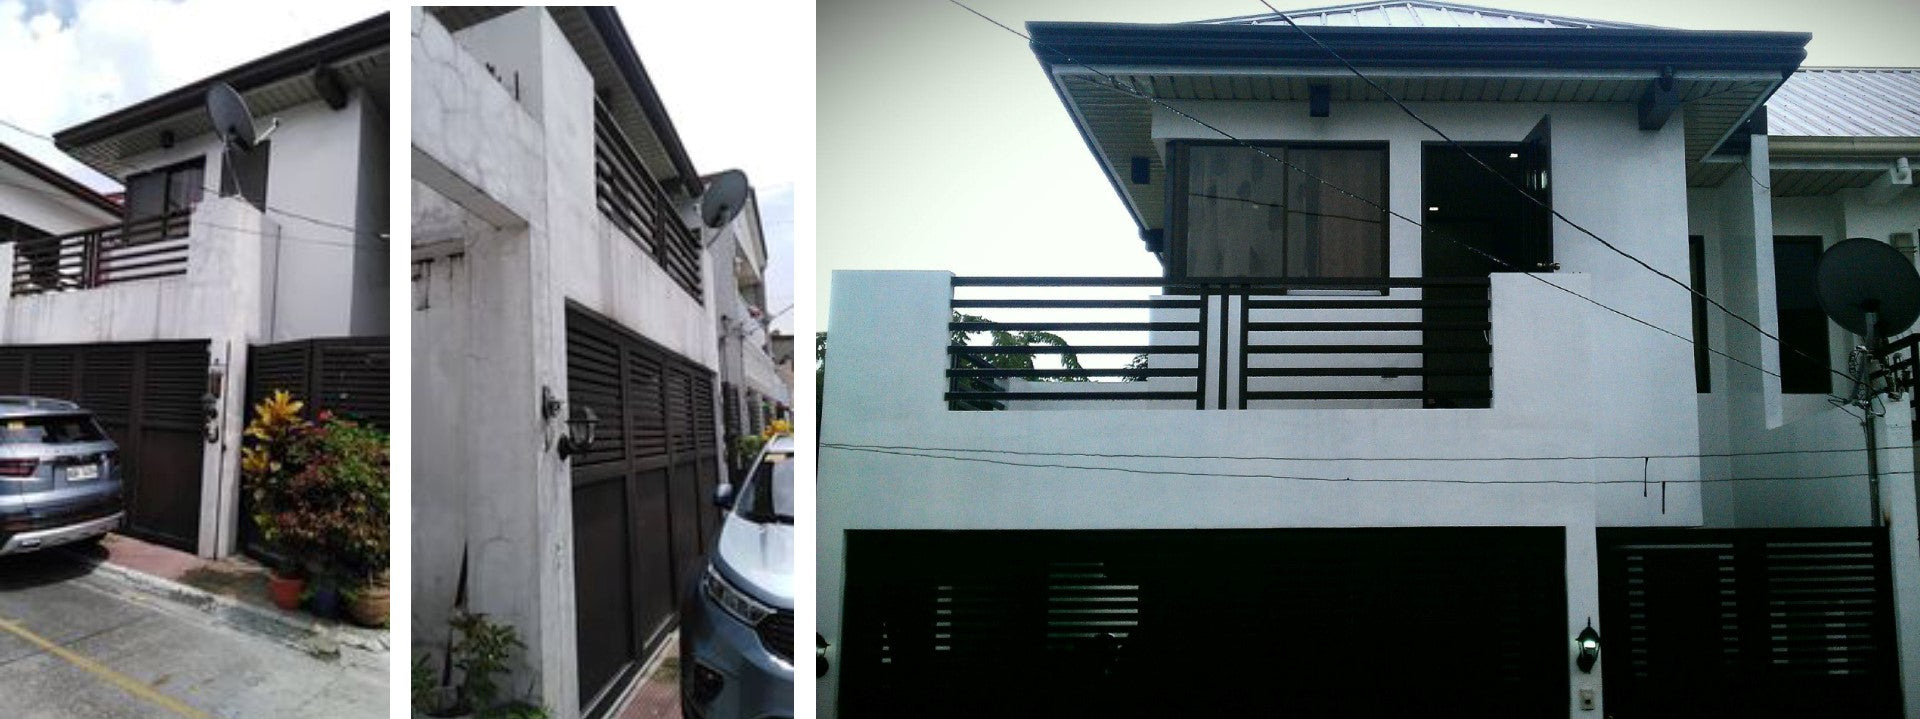 existing condition of the 2 storey house to be renovated